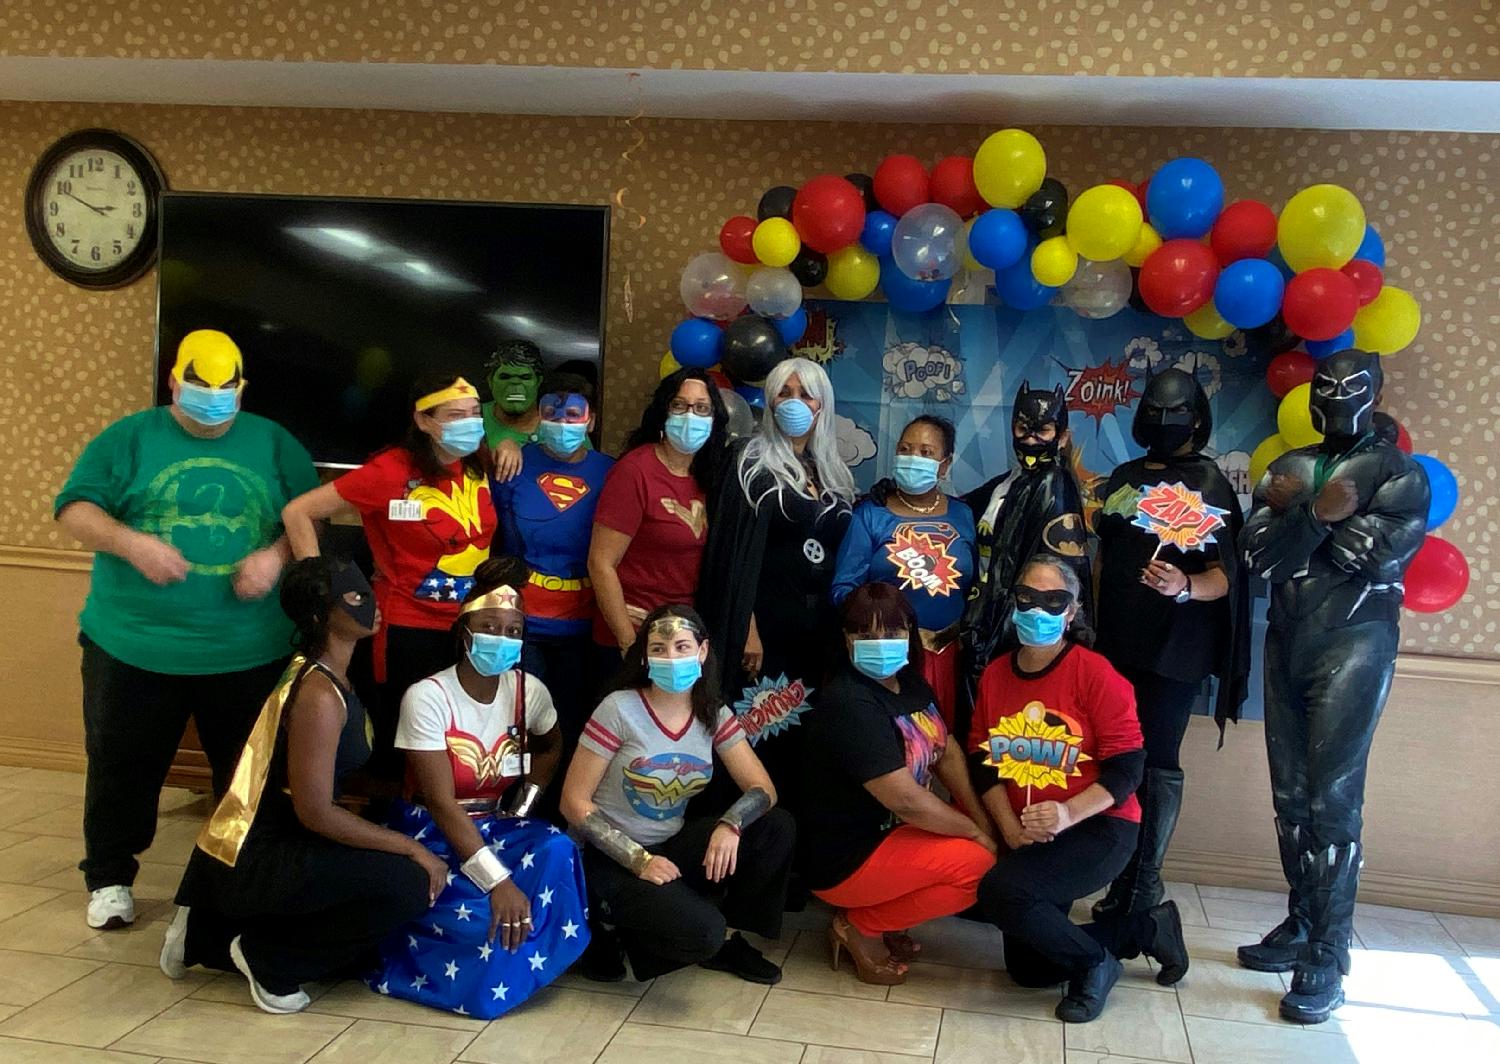 Not all Heroes wear capes!  Having fun is an important part of our culture at NSPIRE.

